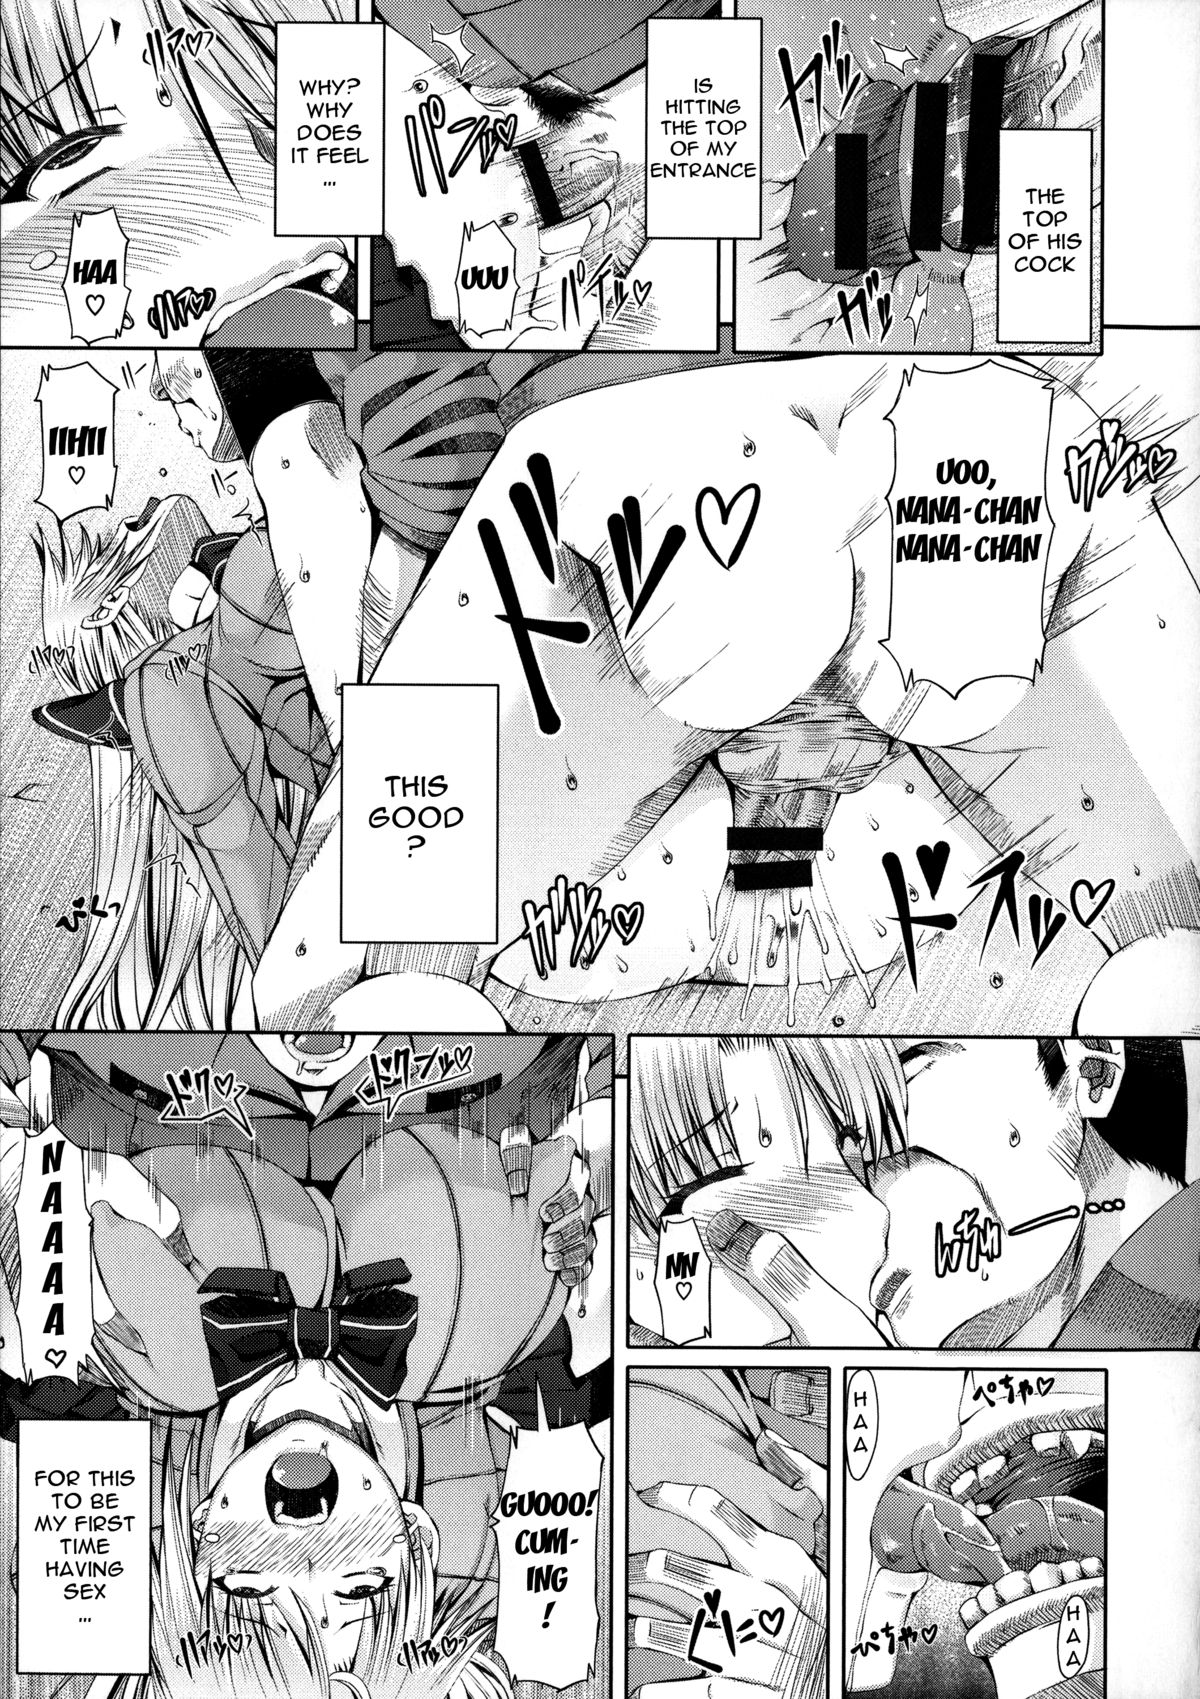 [RED-RUM] LOVE&PEACH Ch. 0-2 [English] {doujin-moe.us} page 42 full